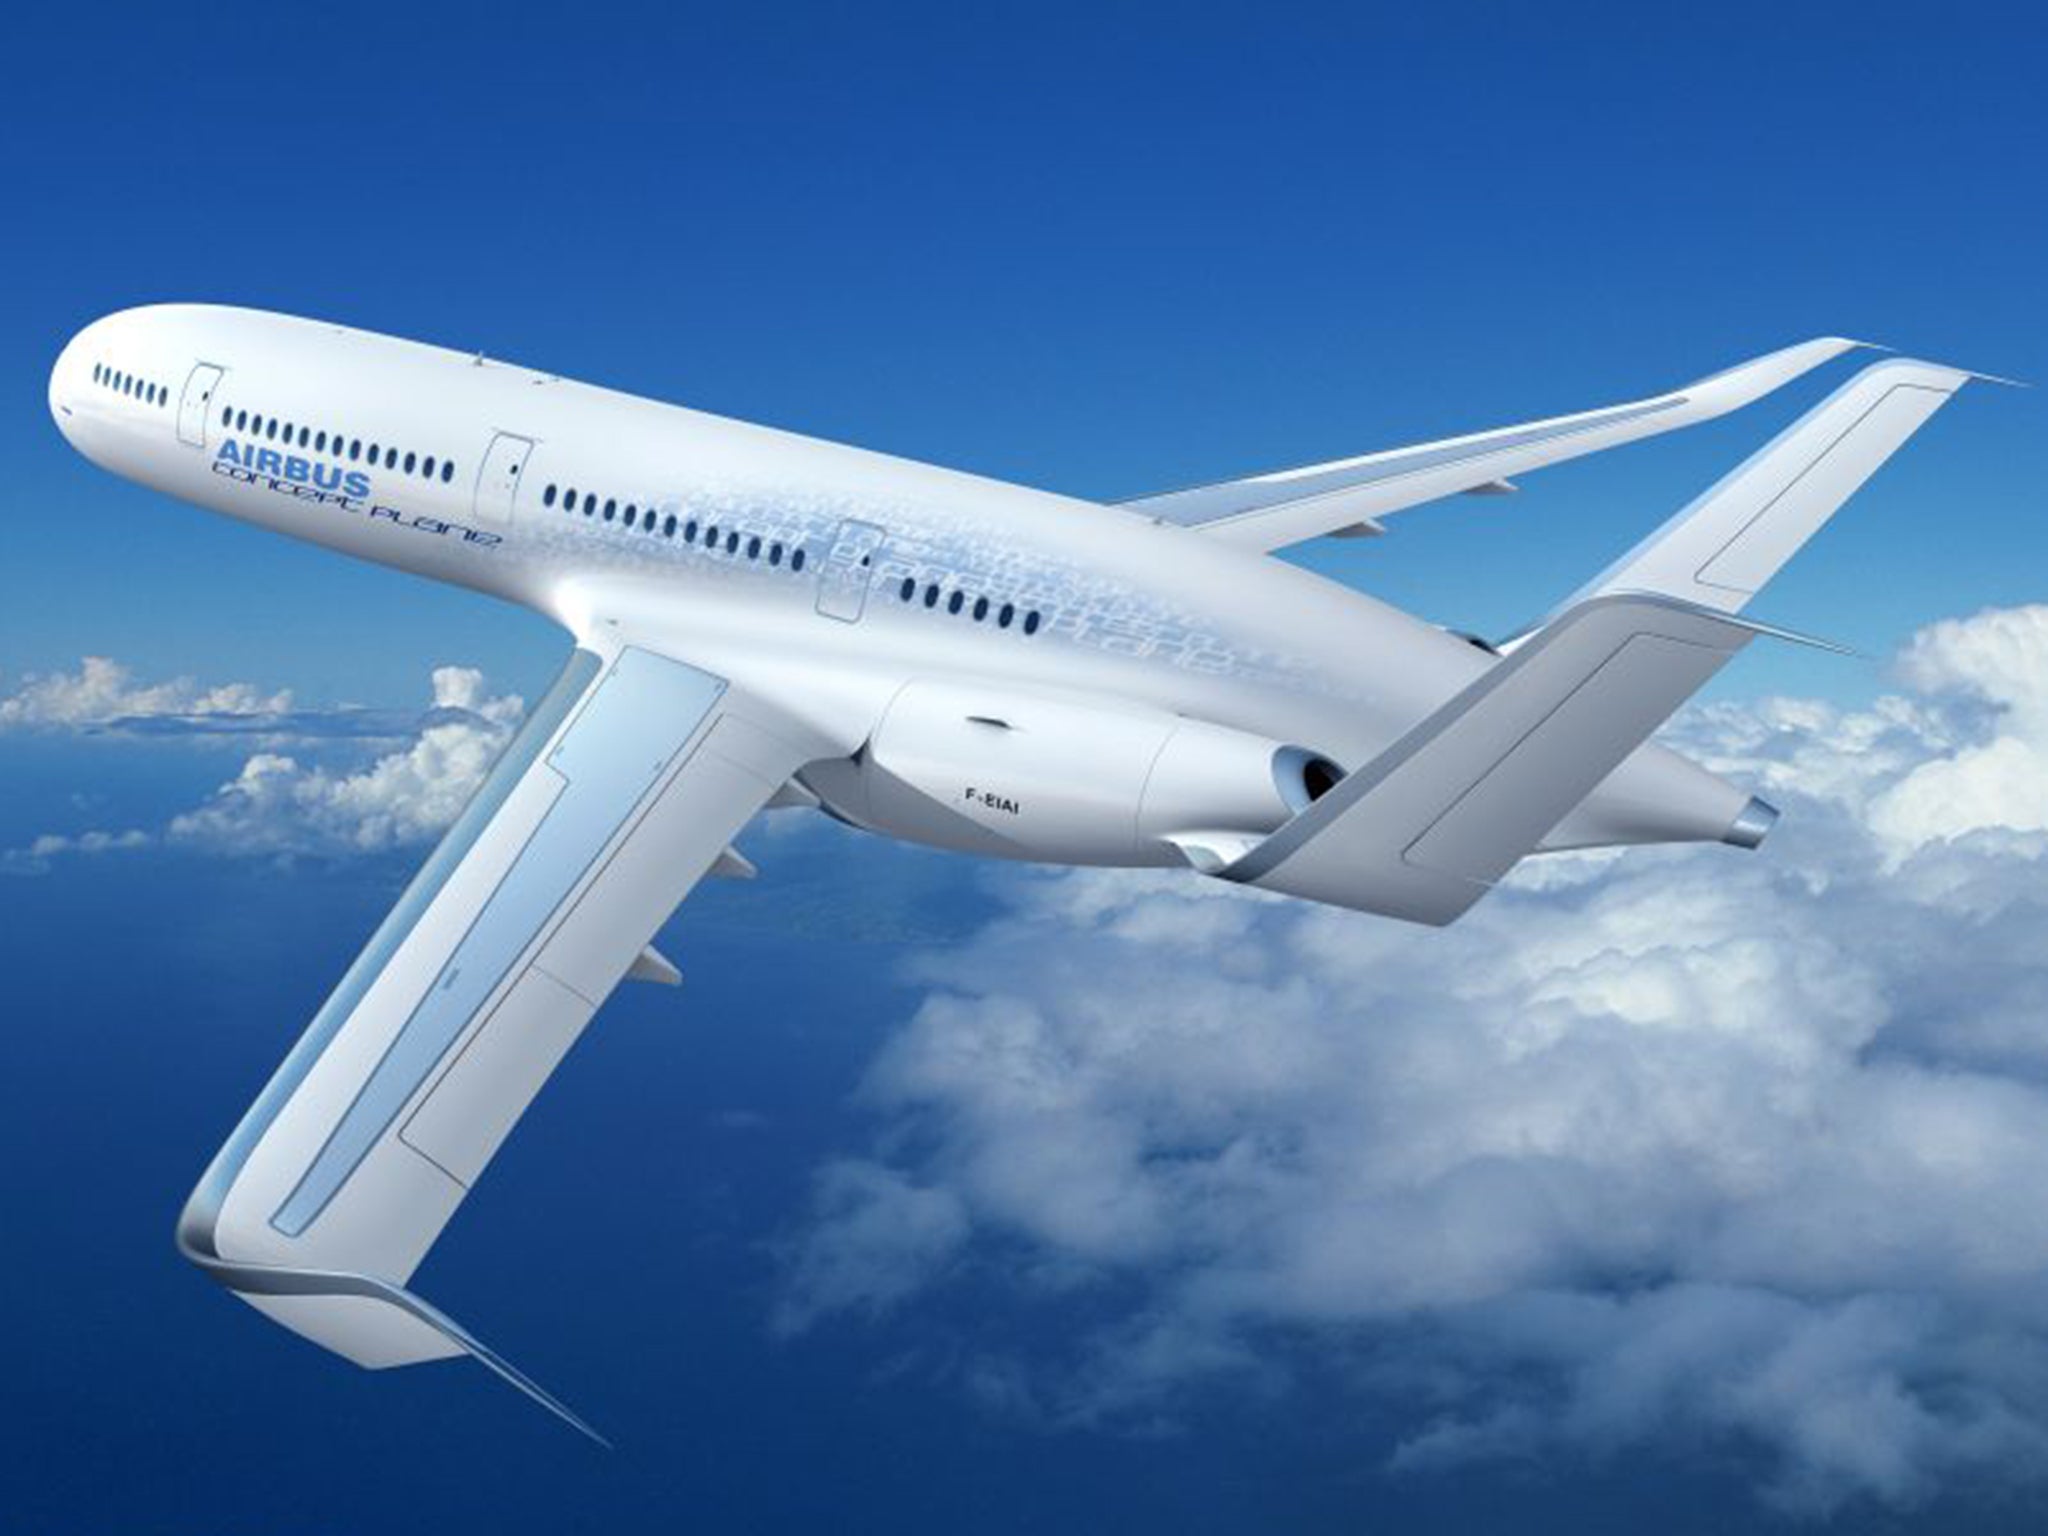 An artist’s impression of the Airbus Concept Plane, which would use plastics instead of aluminium